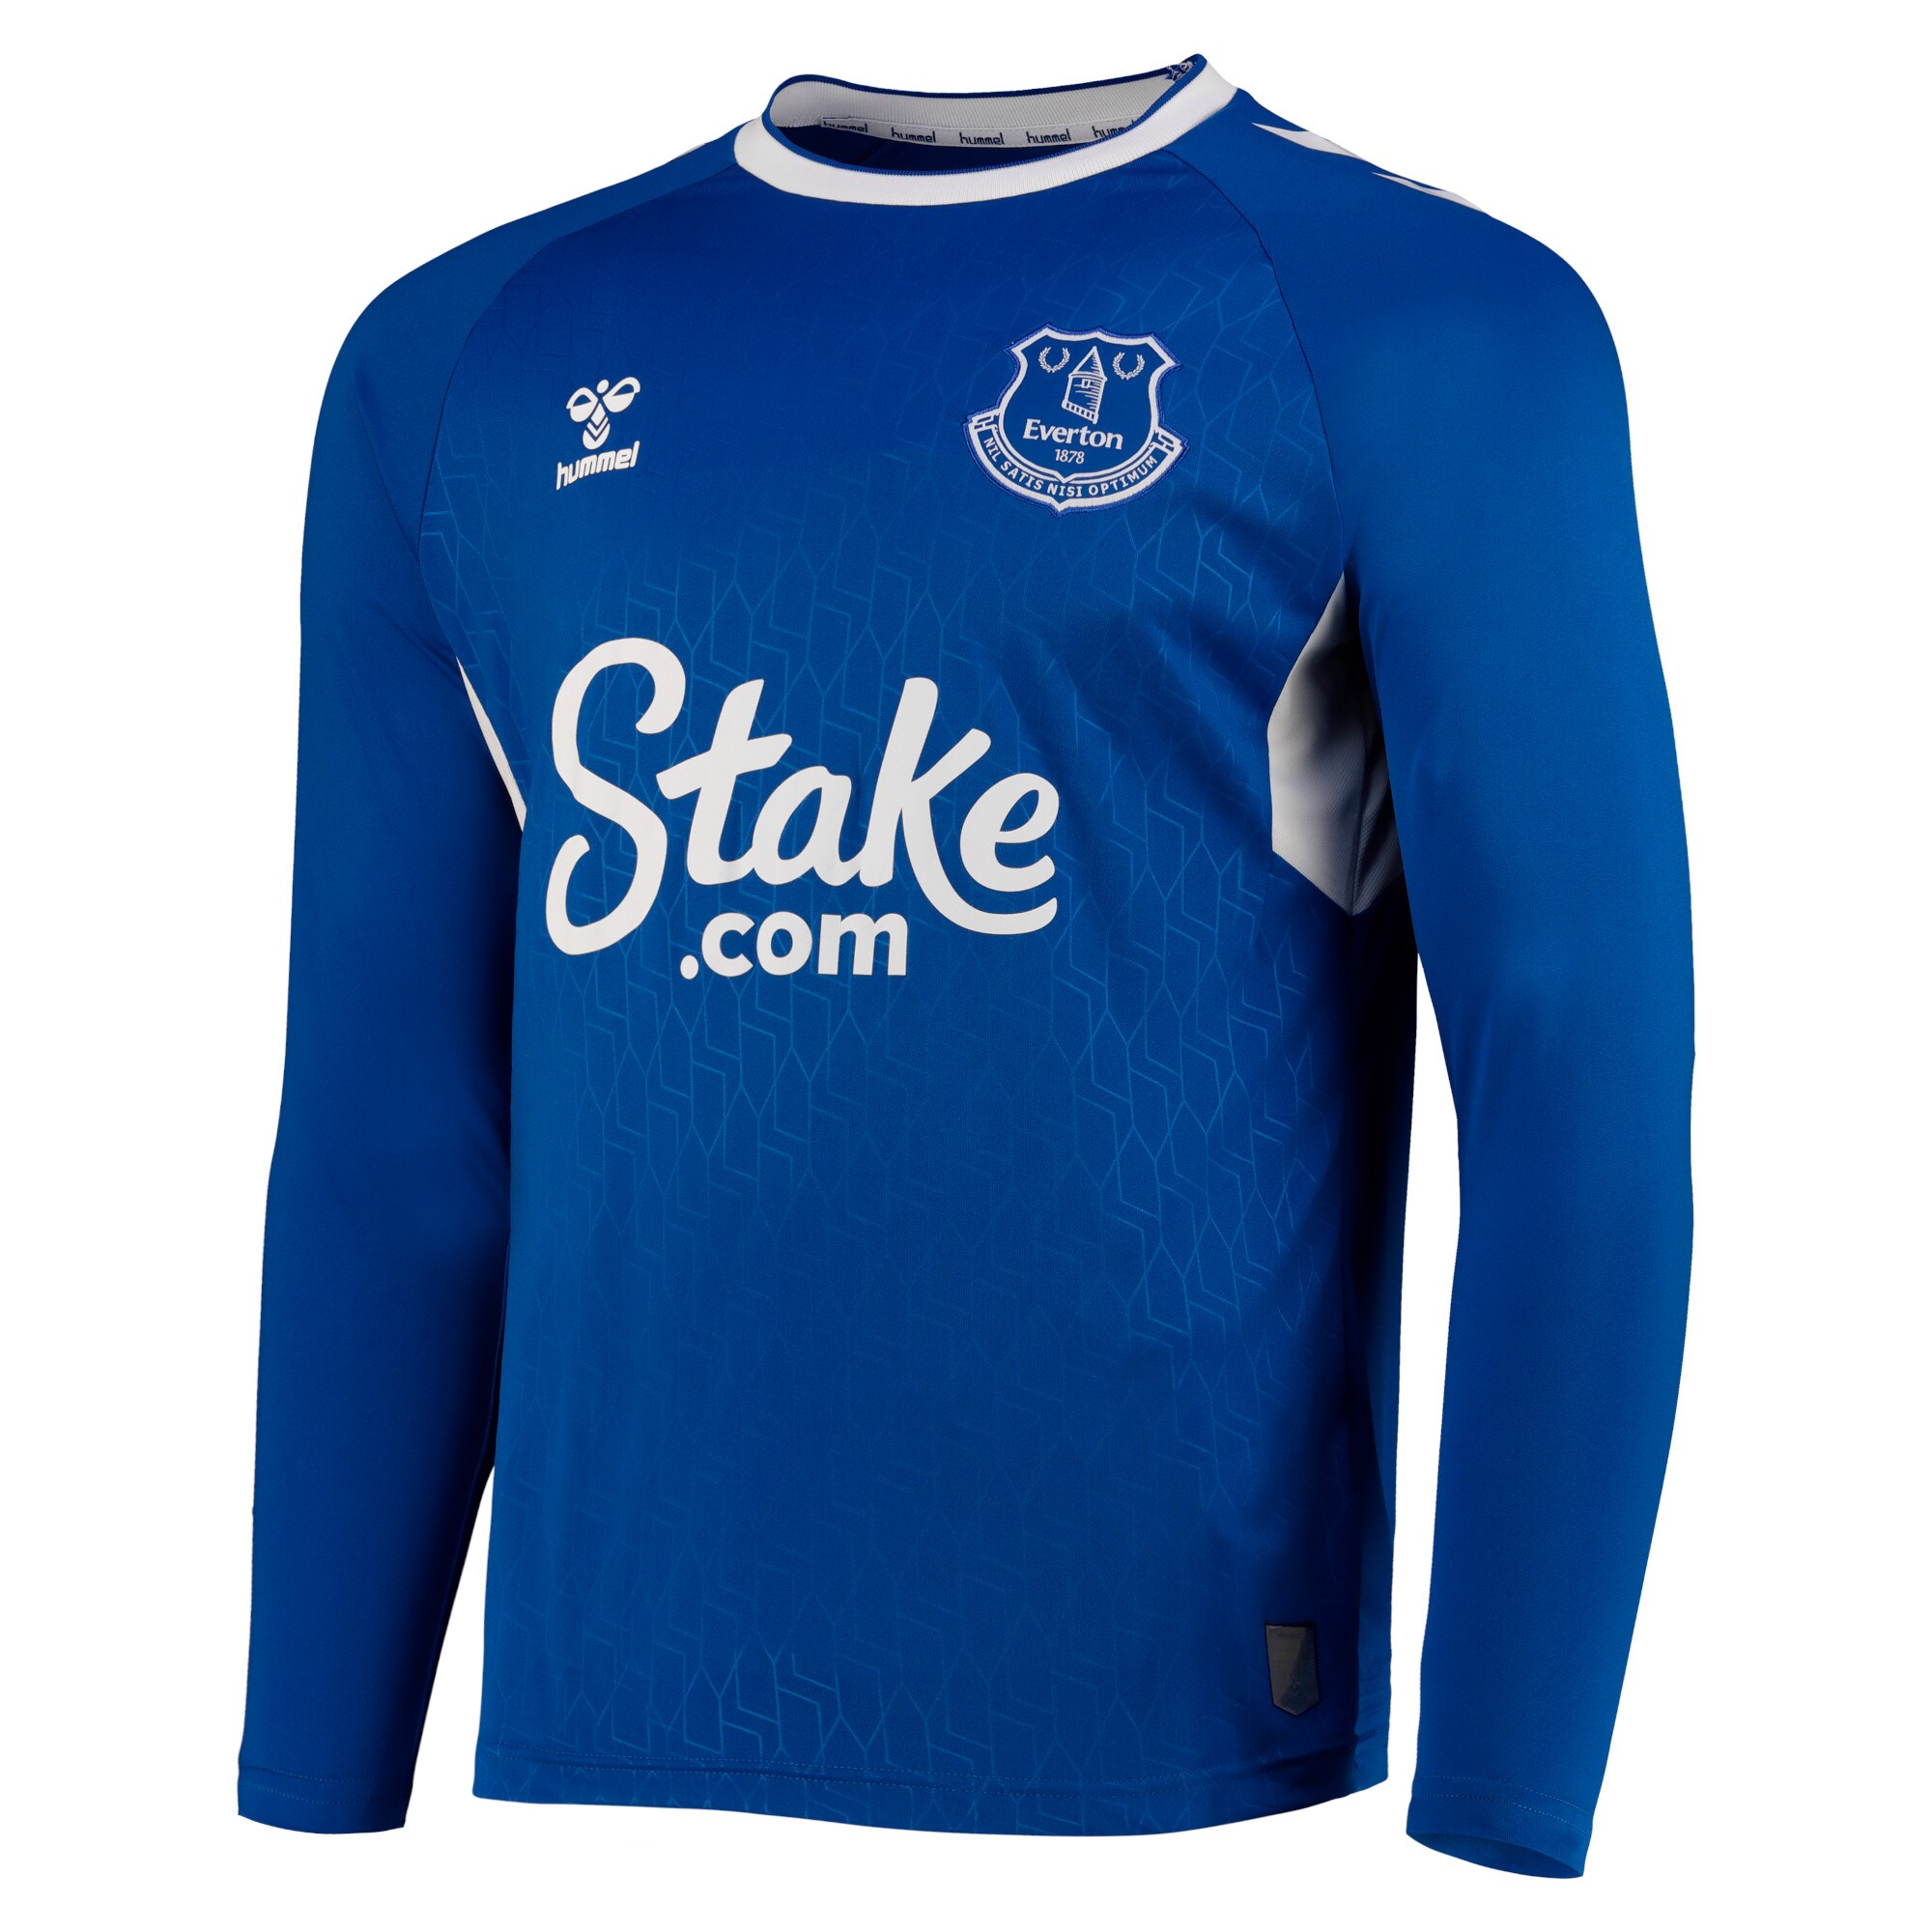 Everton Home Shirt 2022-23 - Long Sleeve with Doucoure 16 printing